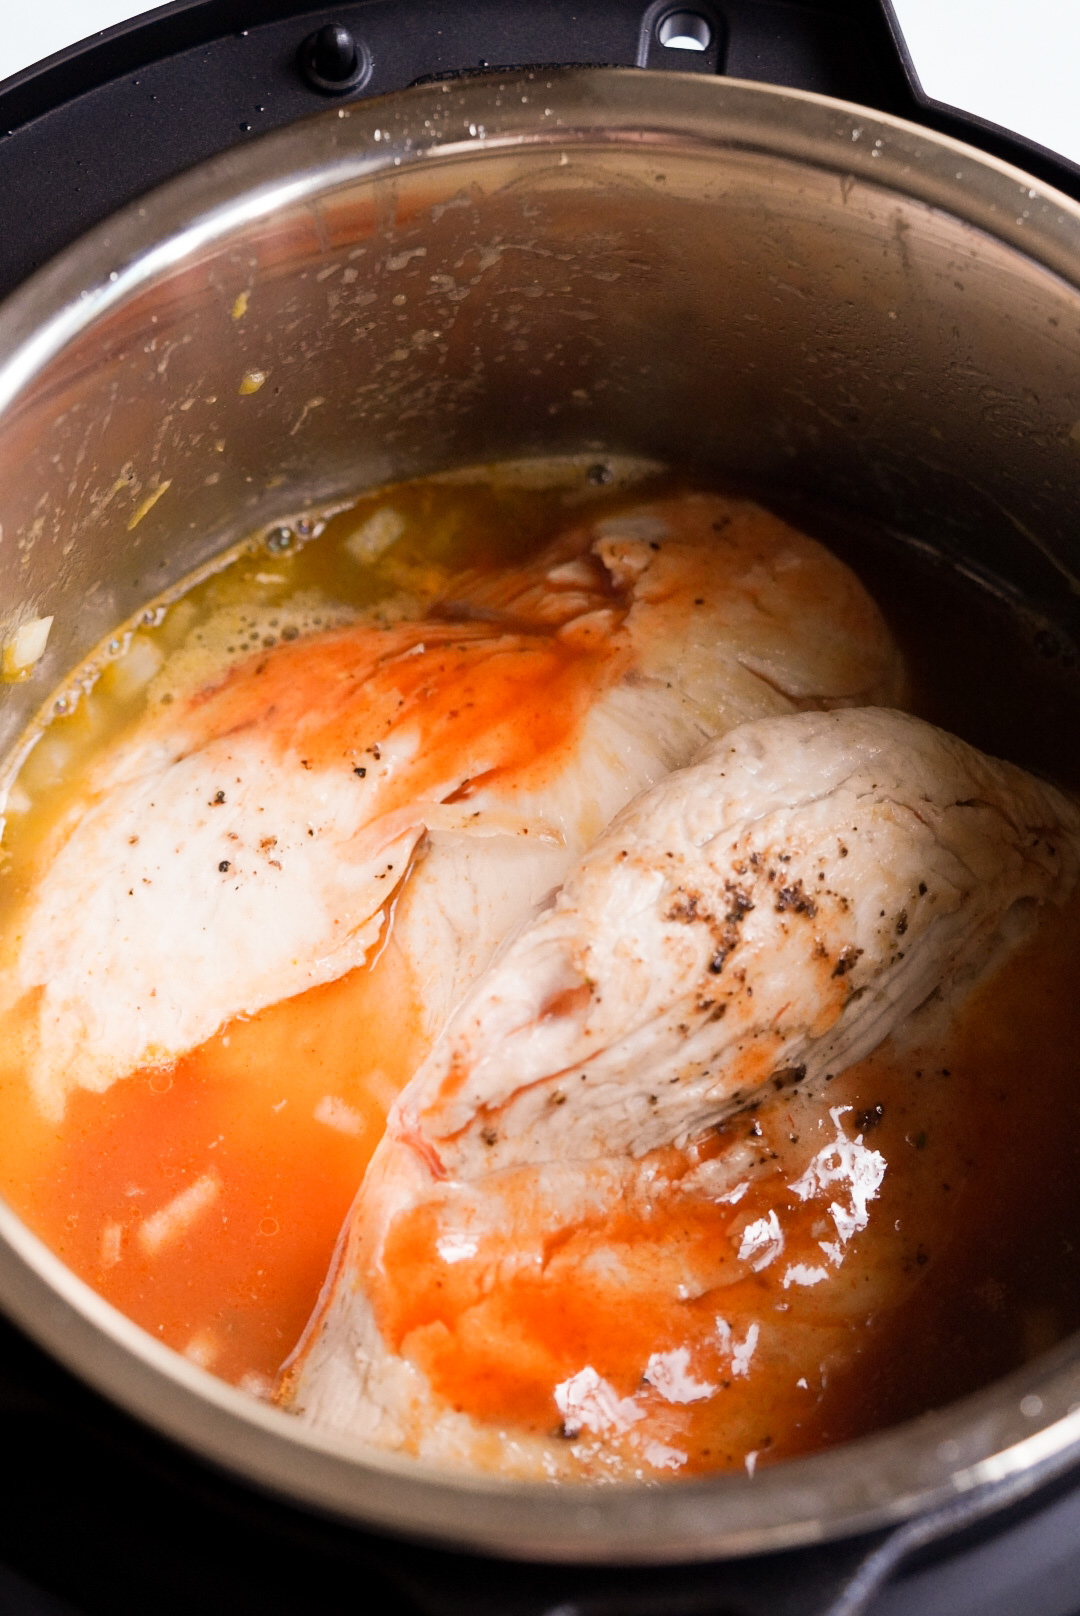 shredded chicken ingredients in instant pot before cooking